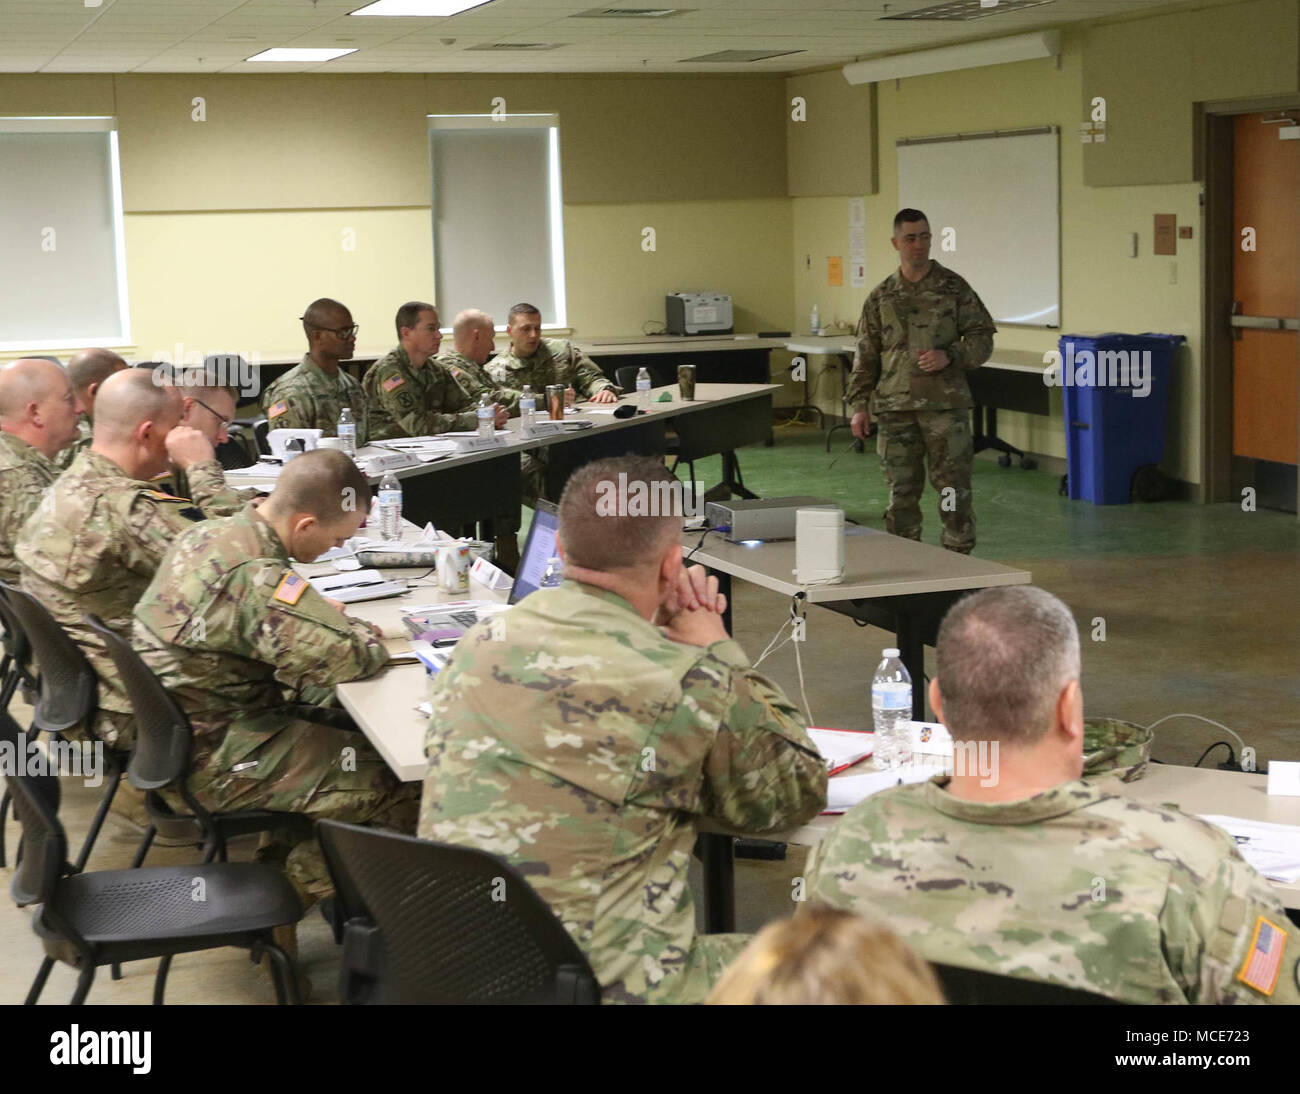 Col. Marc Hoffmeister, commander of the 20th Engineer Brigade speaks to leaders of the 28th Infantry Division supporting units at the two-day US Army Central Intermediate Division Headquarter Leader’s Conference at Fort Hood, Texas on Feb. 13, 2018.  (Photo by Master Sgt. Daniel Palermo) Stock Photo